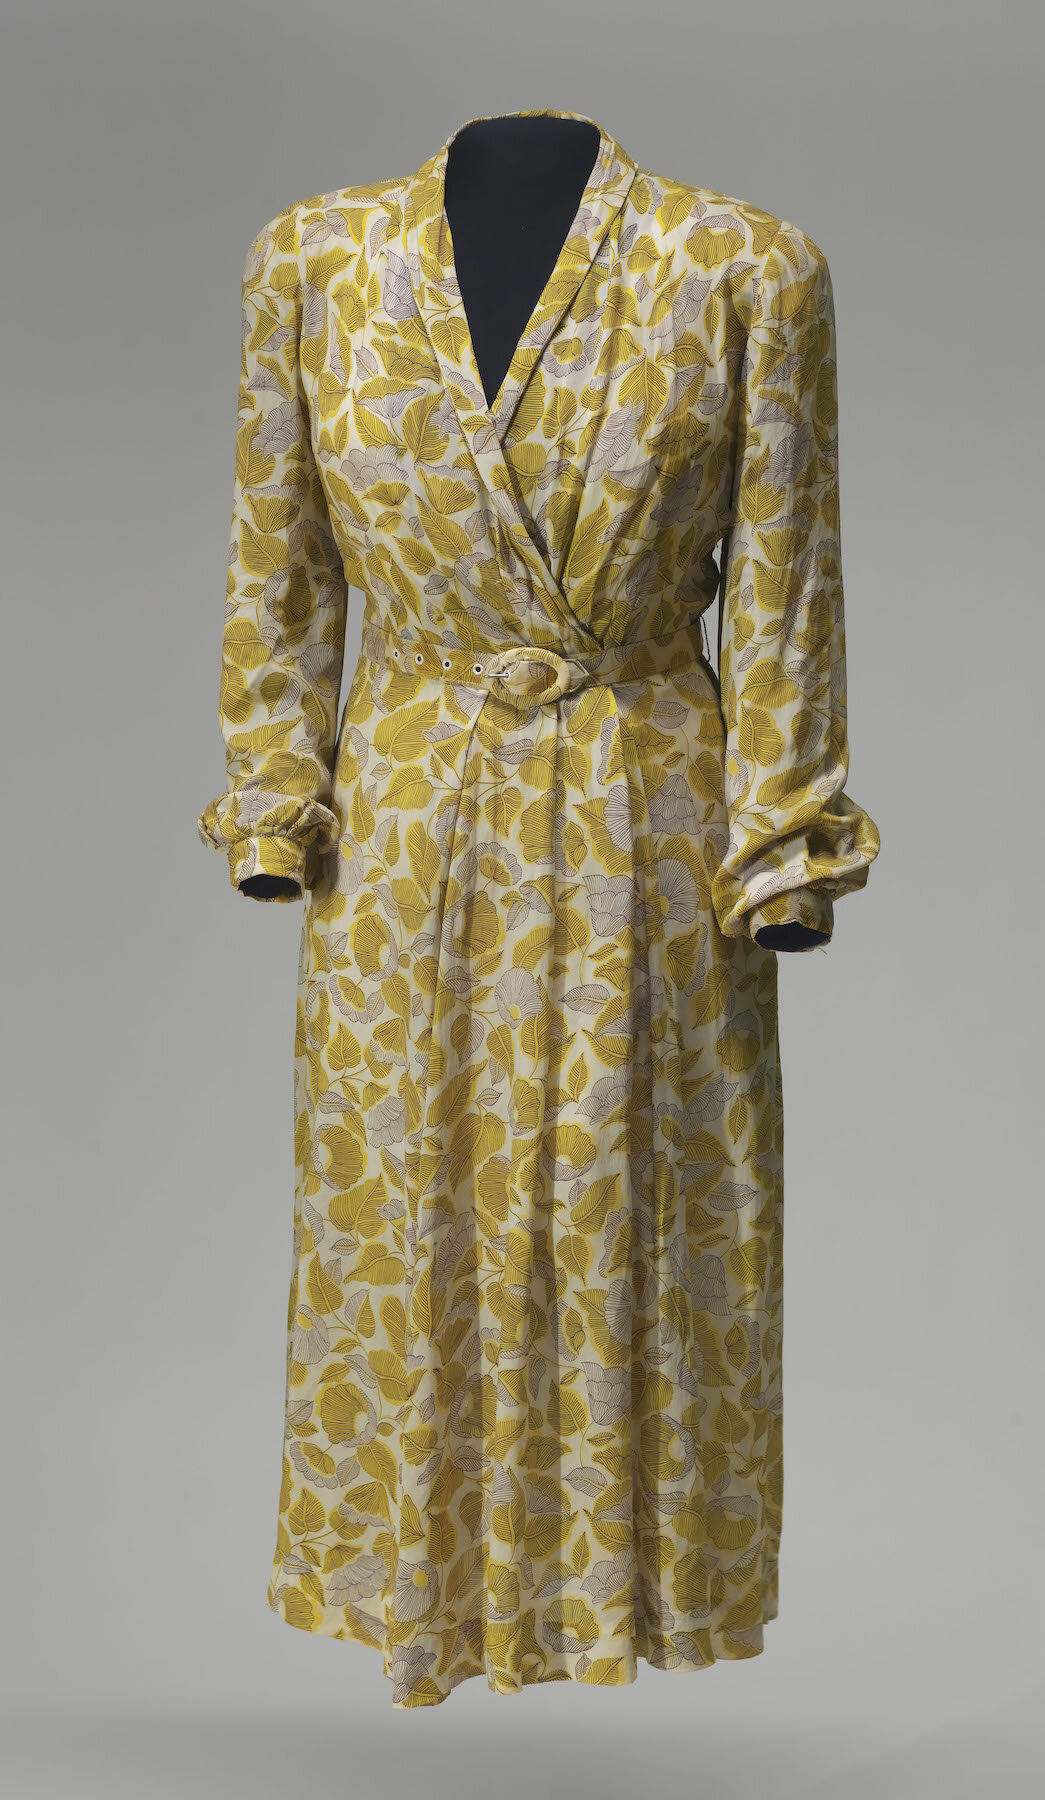 Dress sewn by Rosa Parks 1955 - 1956